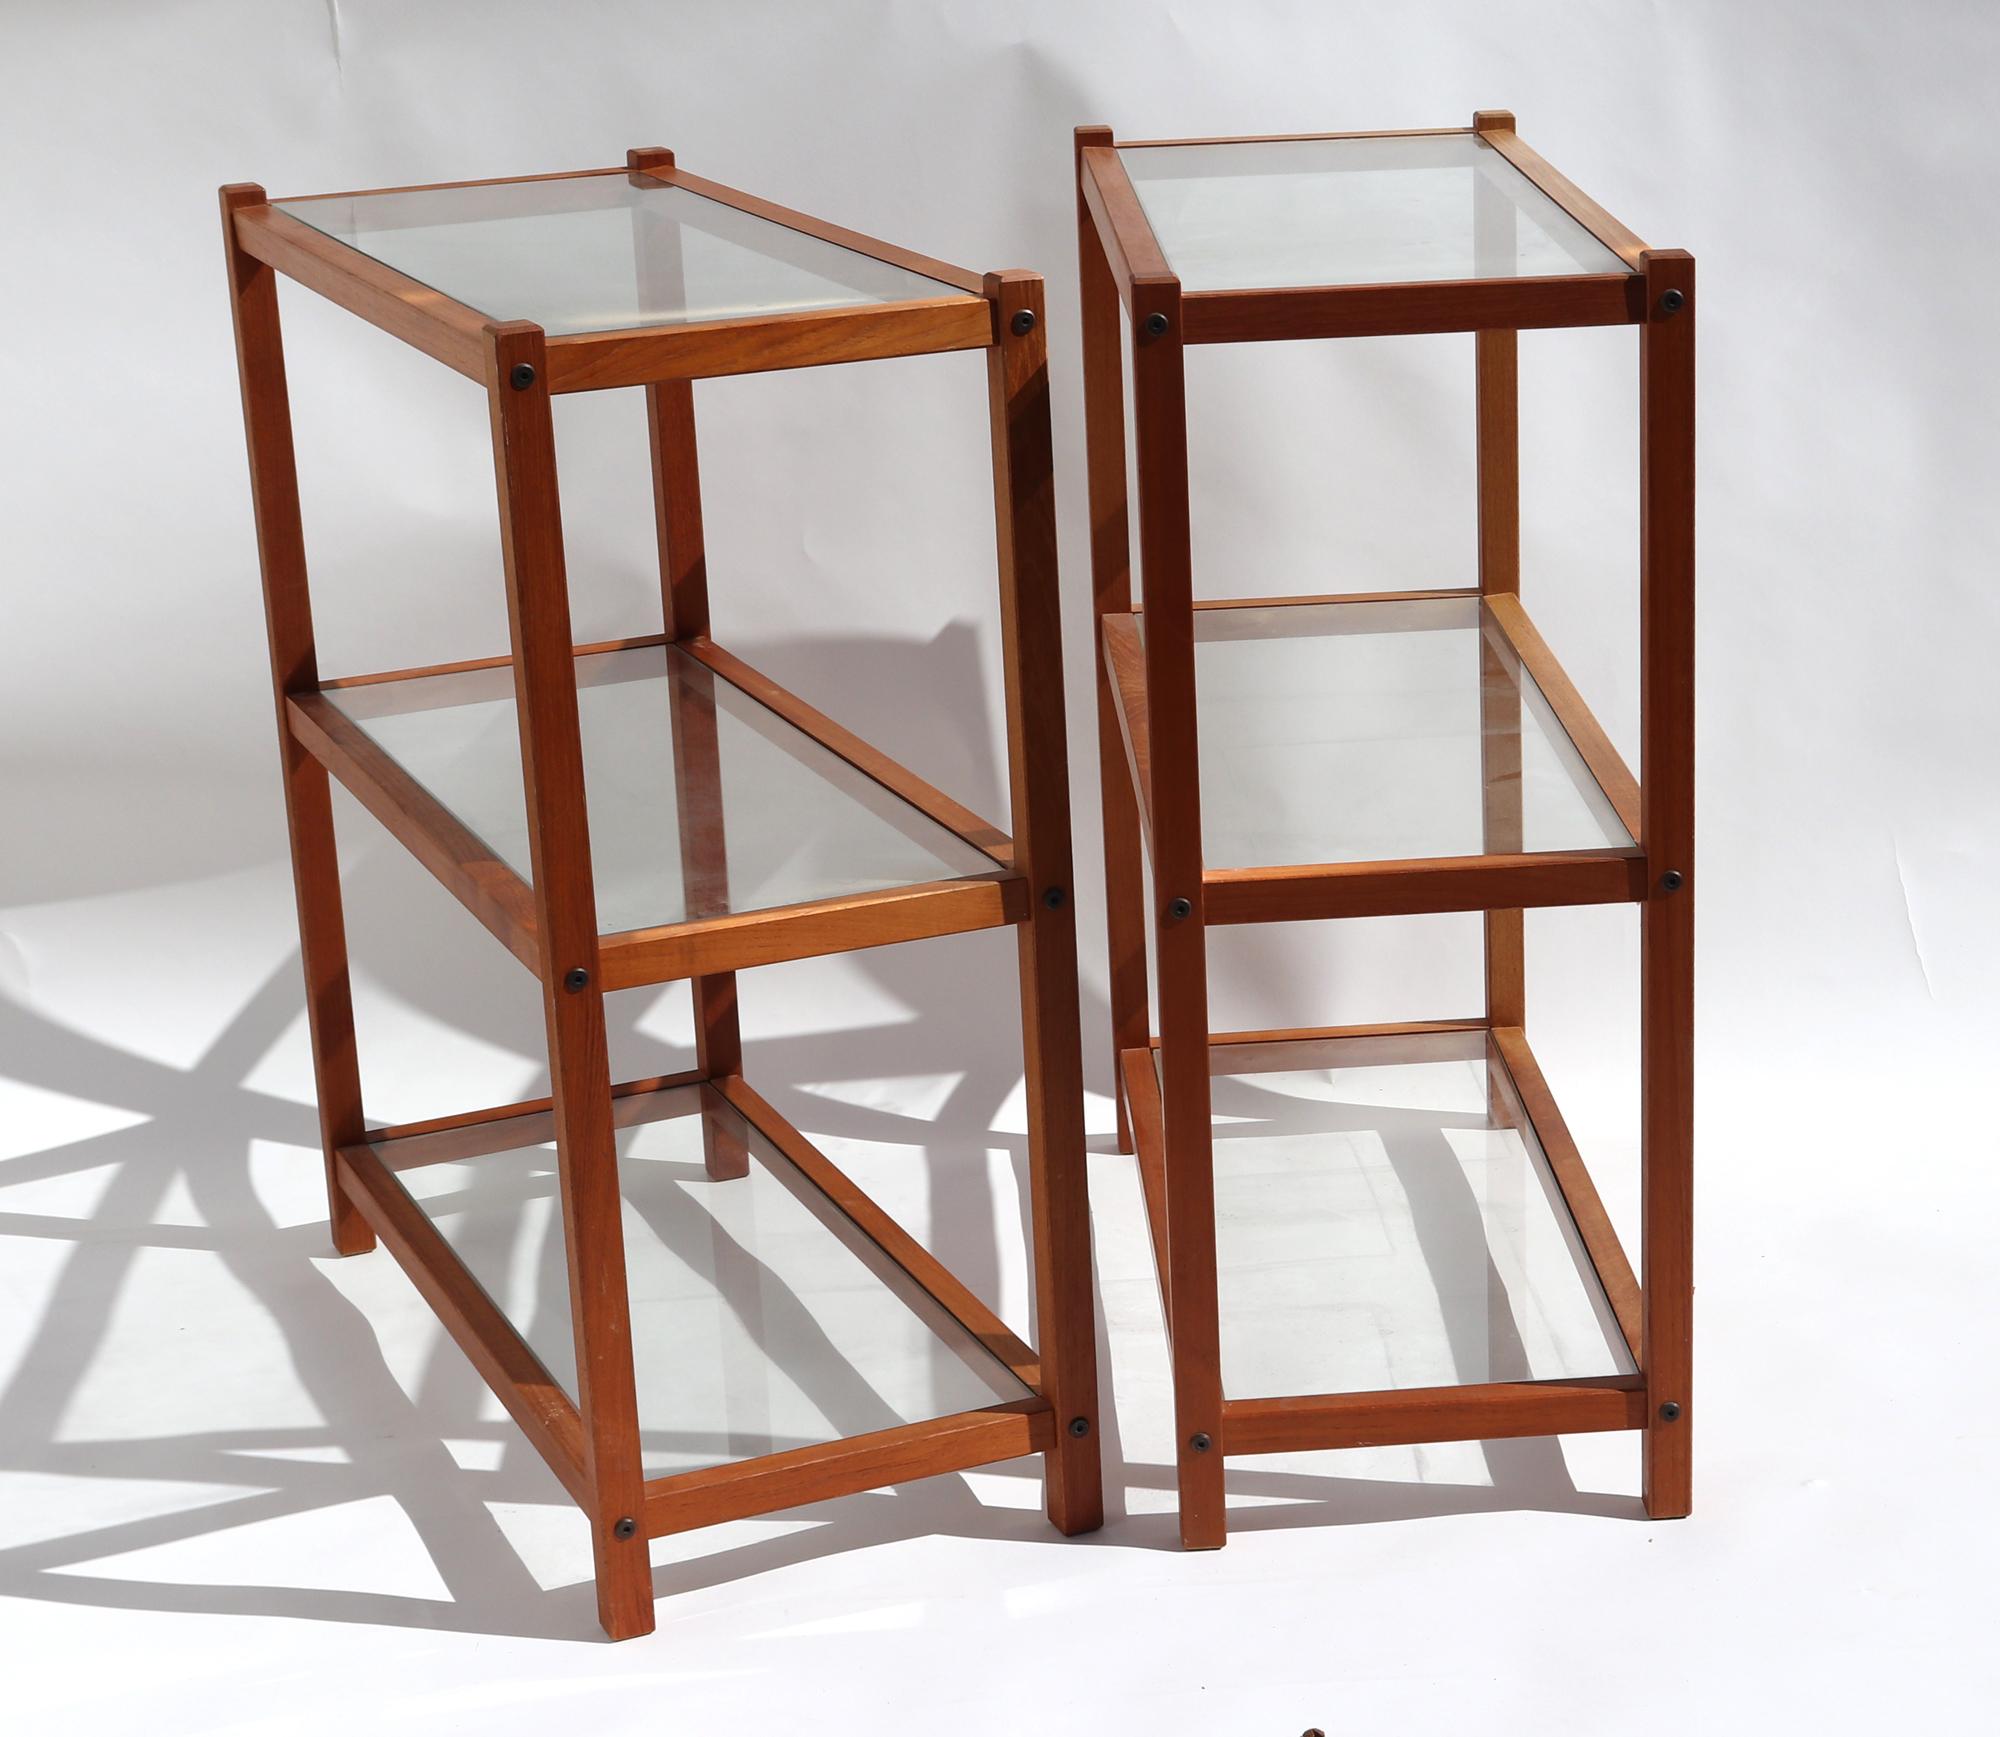 Danish Modern Teak and Glass Etageres,
1970s-80s

The Scandinavian Modern pair of teak and glass etageres each have three removable glass shelves.
 